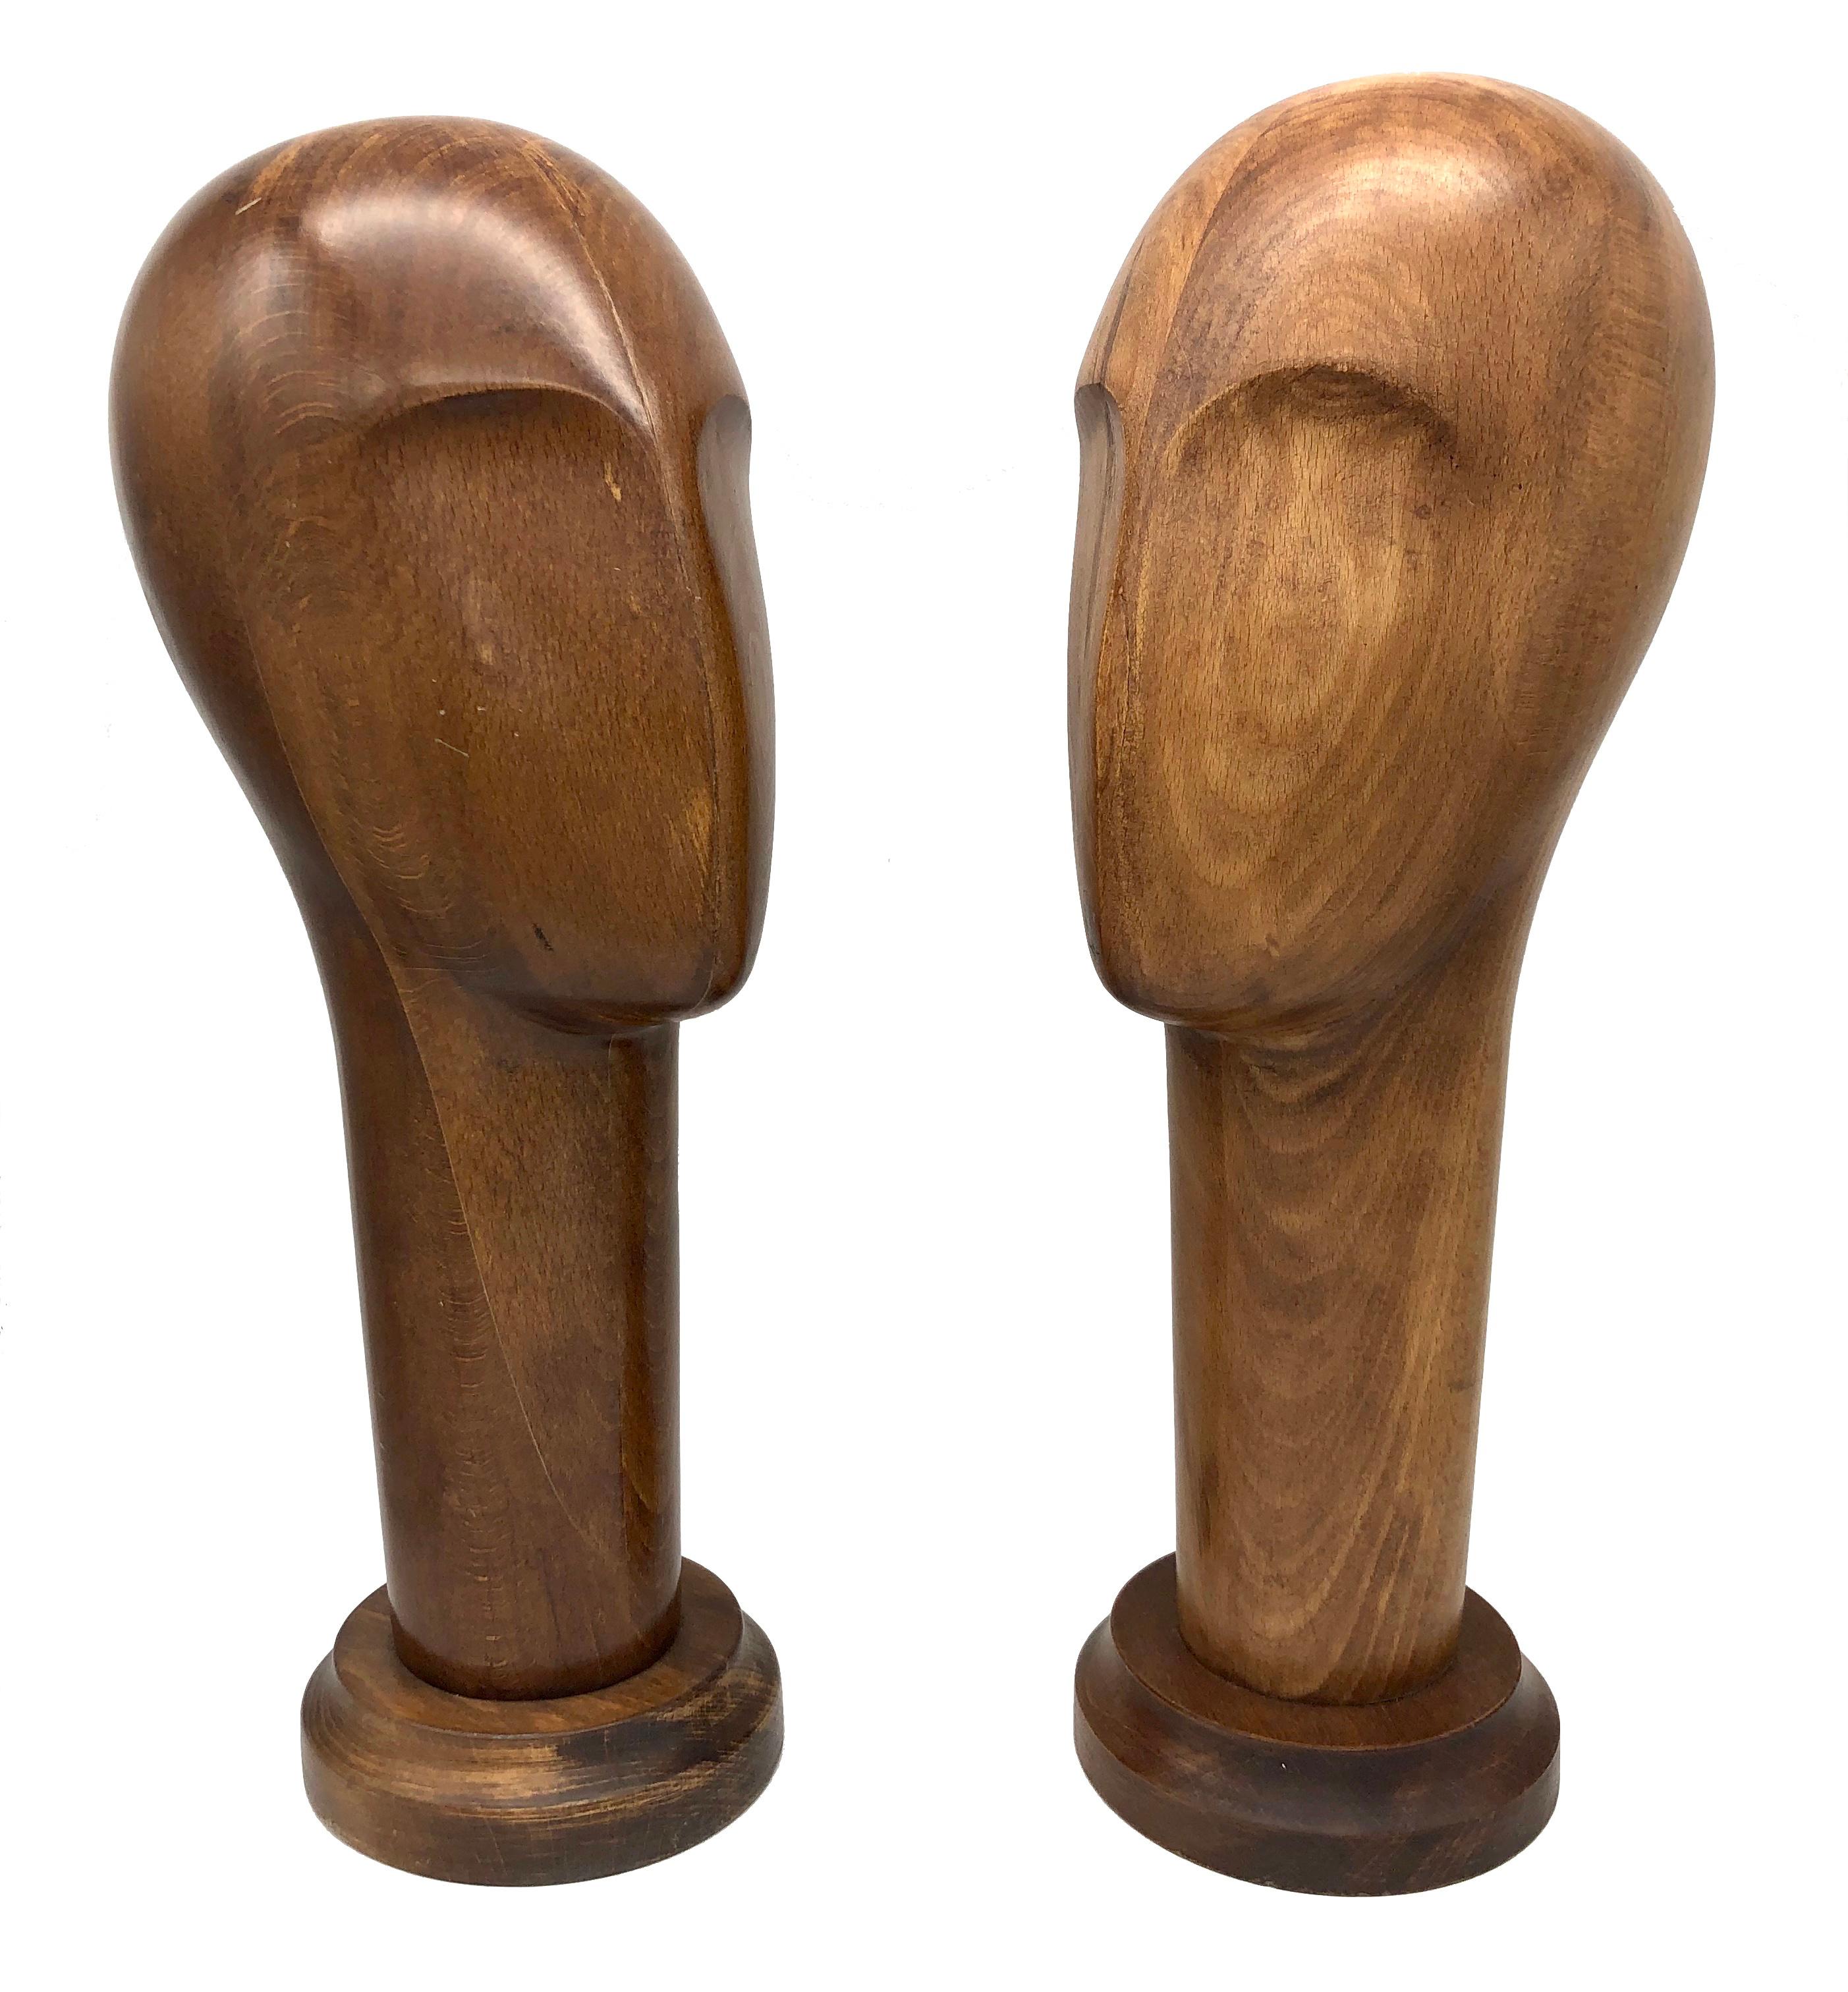 This pair of wonderfully carved wooden bust were meant most likely for hats. Their abstraction and their quiet charm owes inspirtion to sculptor  Constantin Brancusi.
 